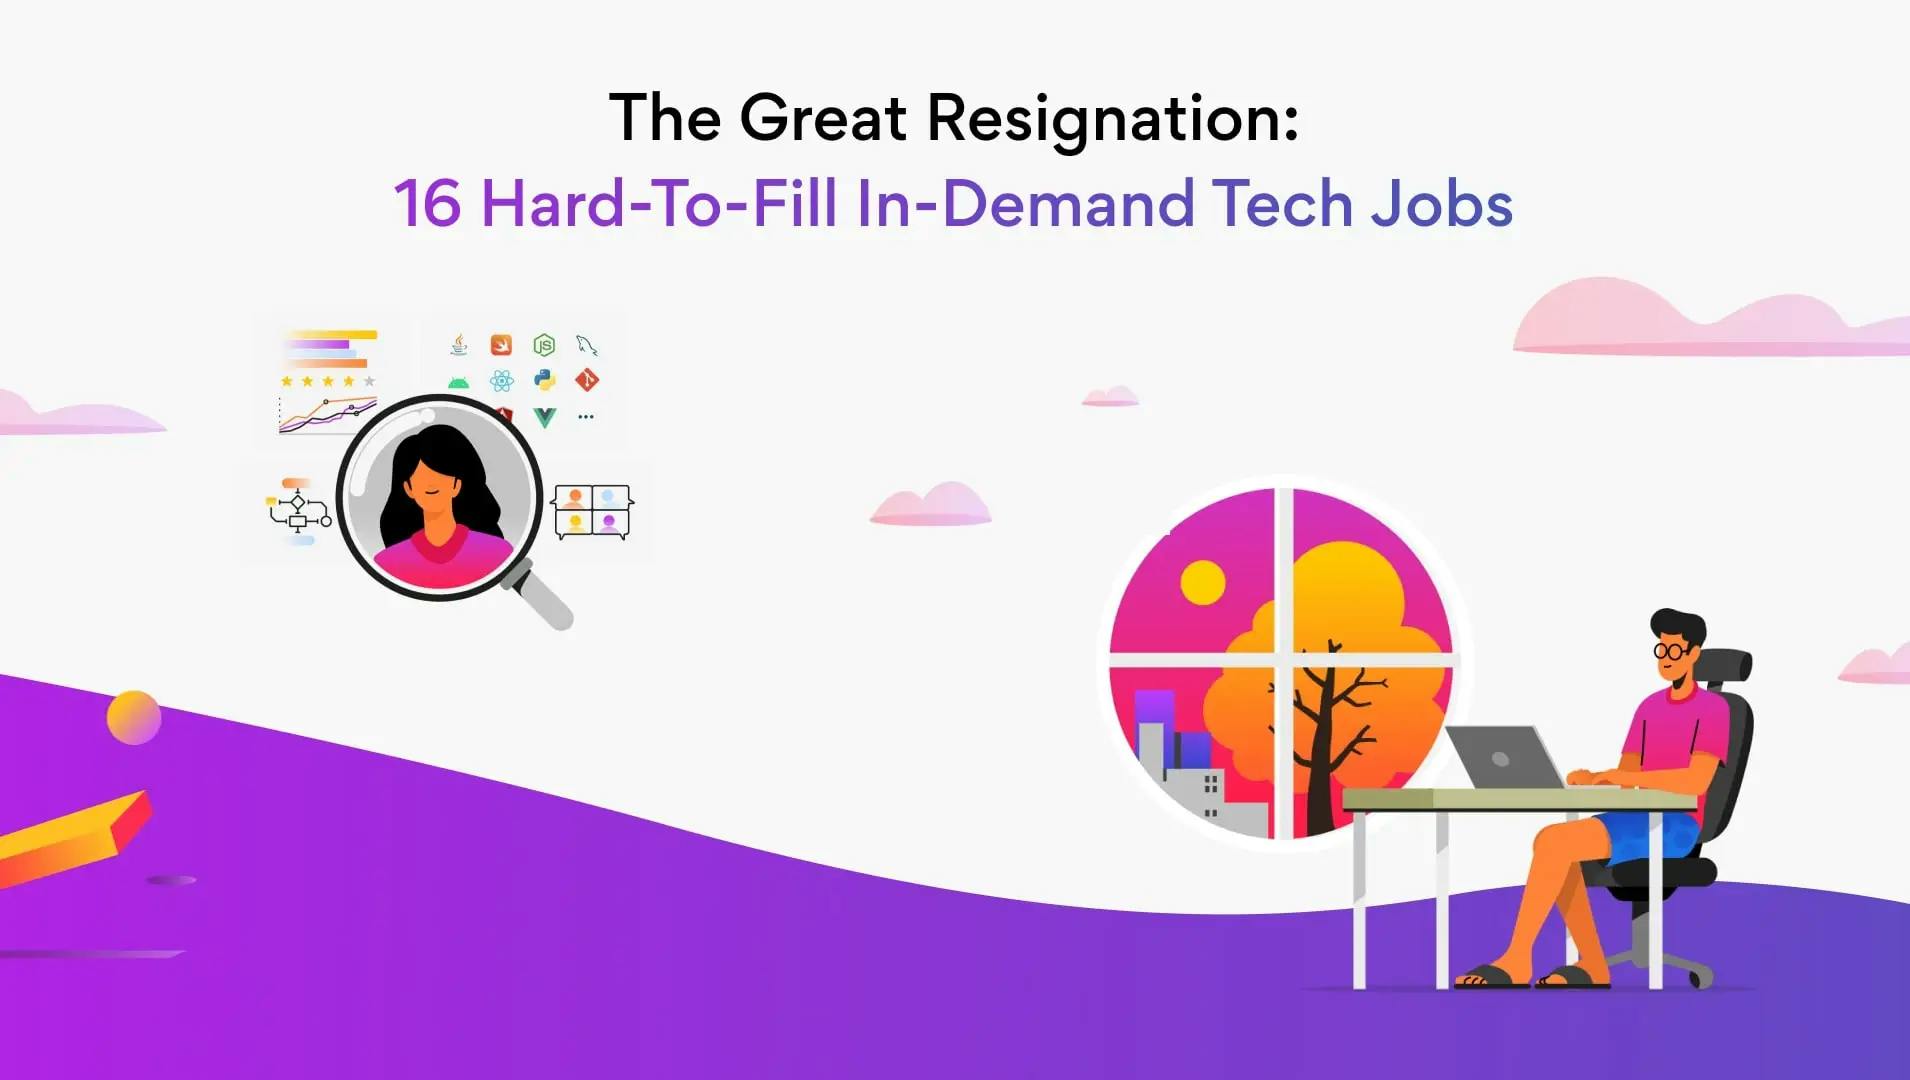 The Great Resignation: 16 Most In-Demand, Hard-To-Fill Tech Jobs